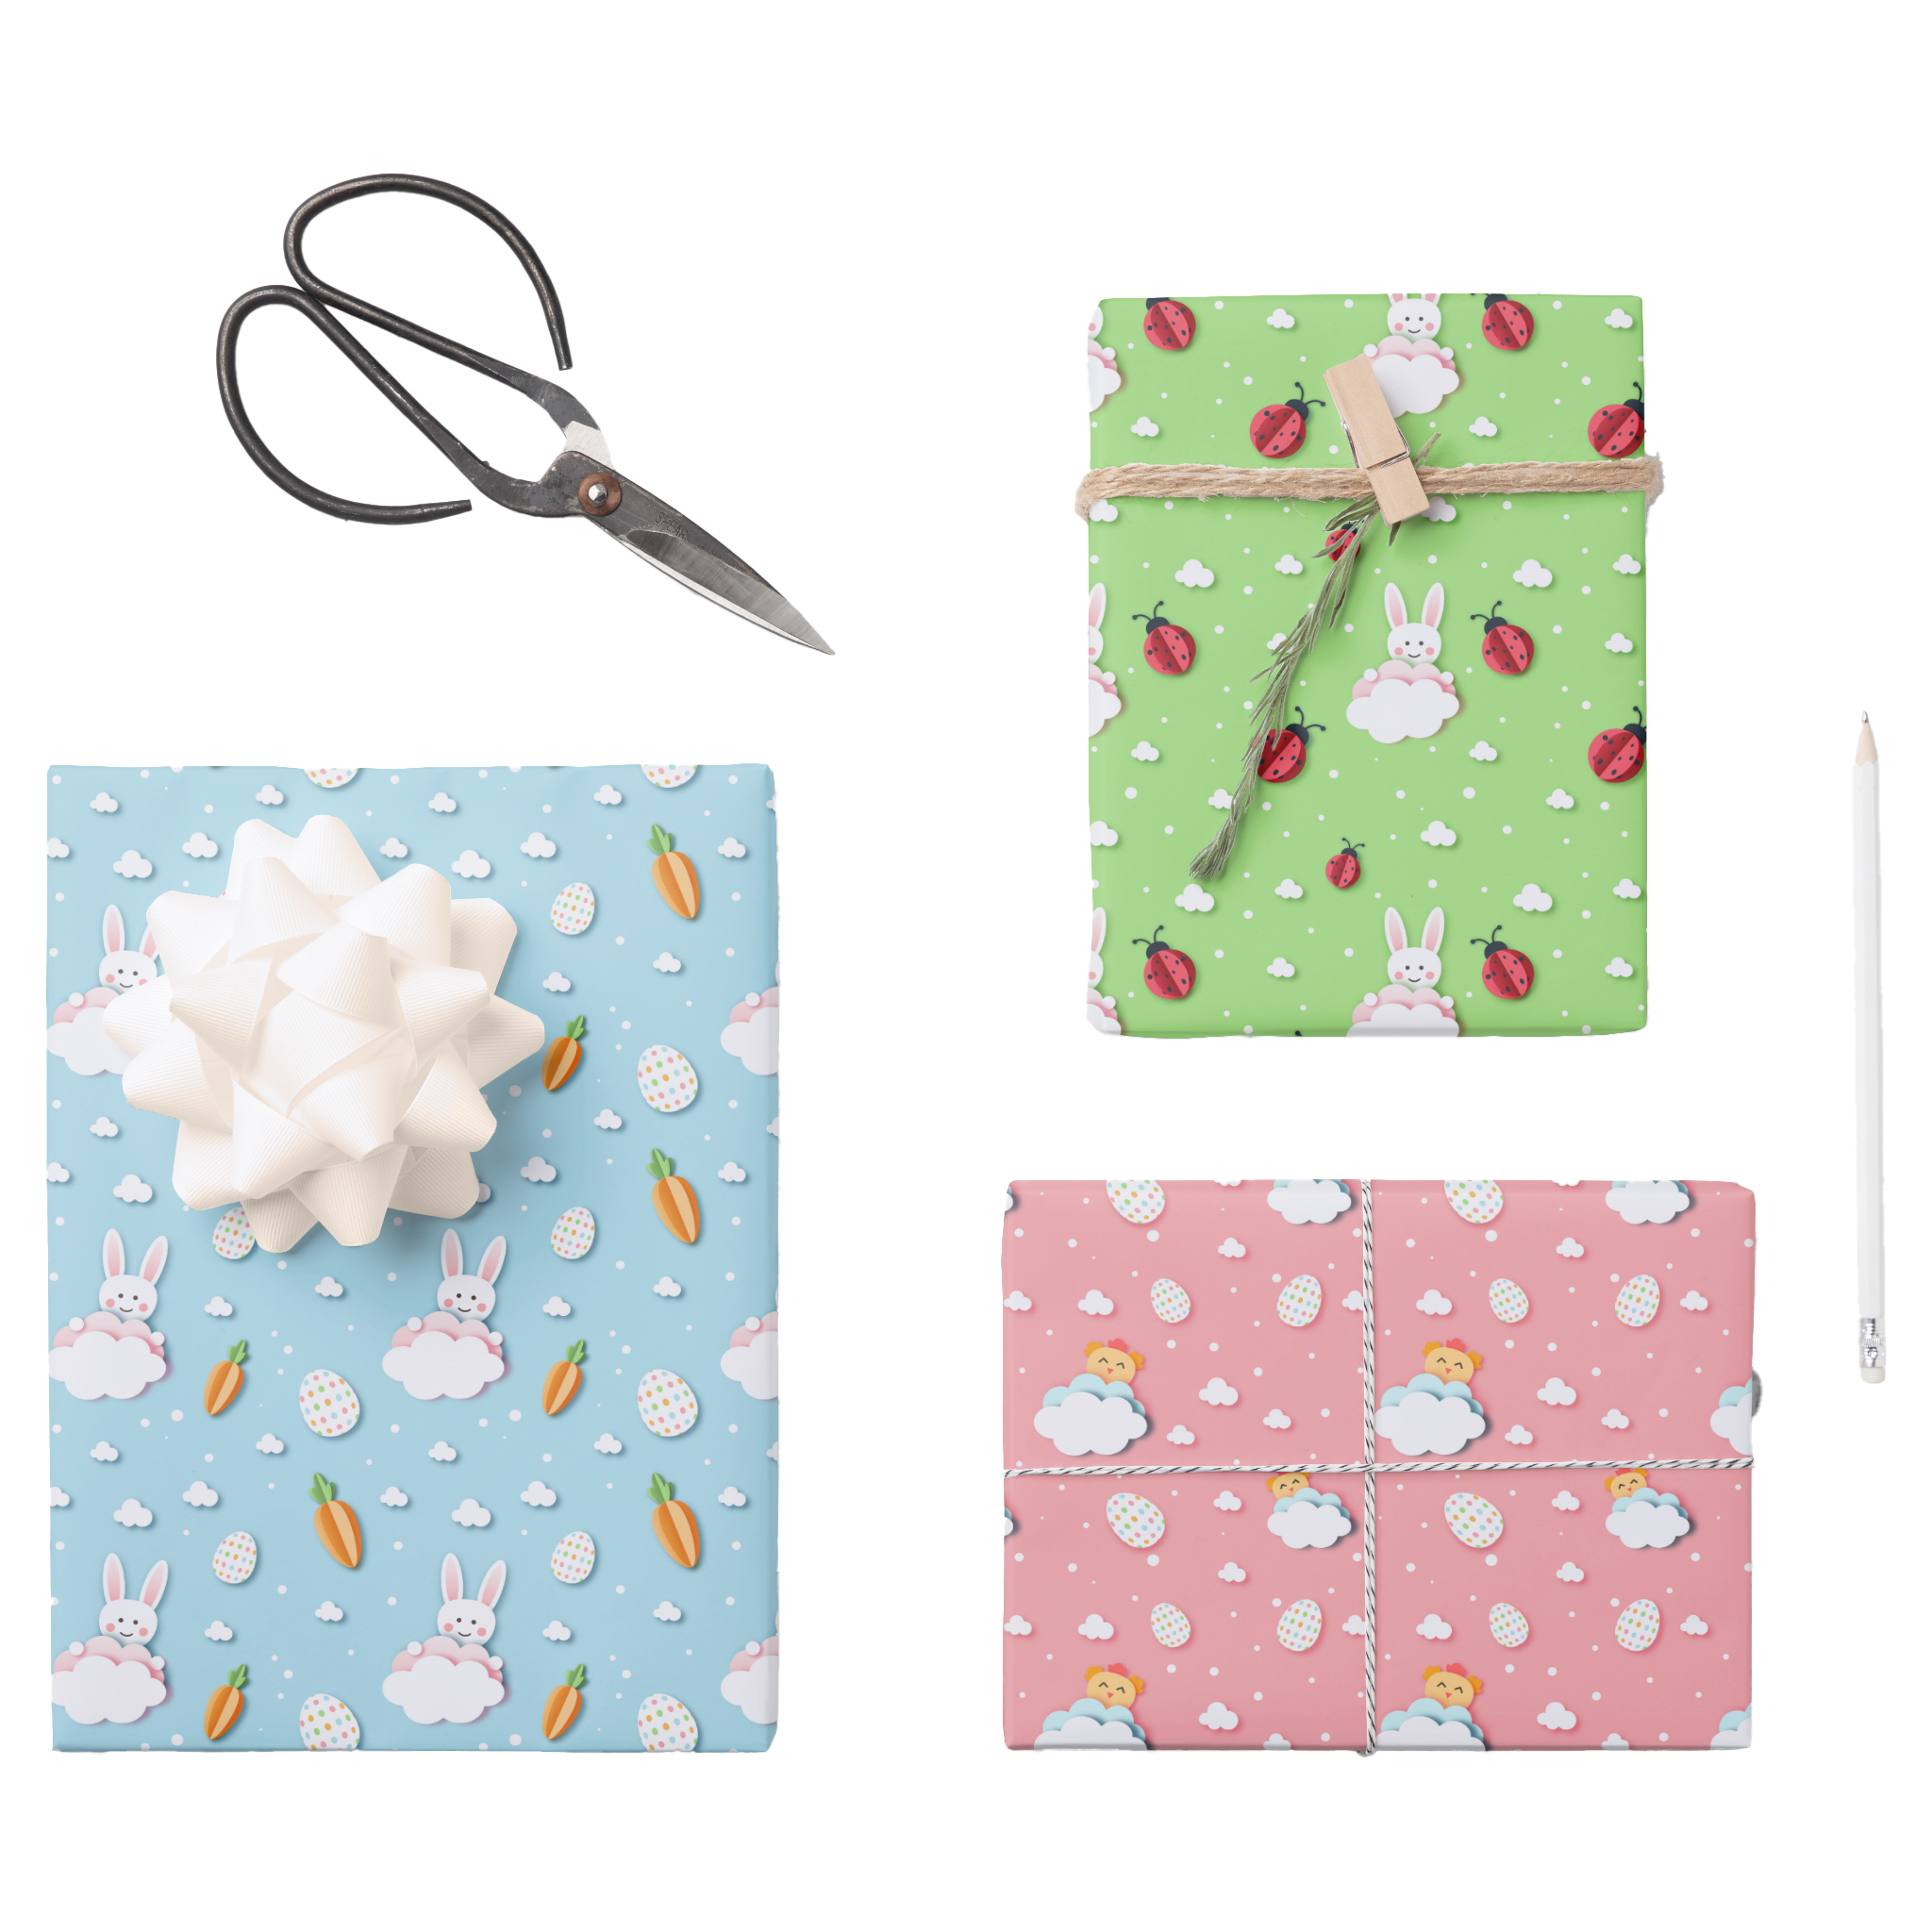 Easter Bunny, Egg, Carrot & Ladybug Wrapping Paper